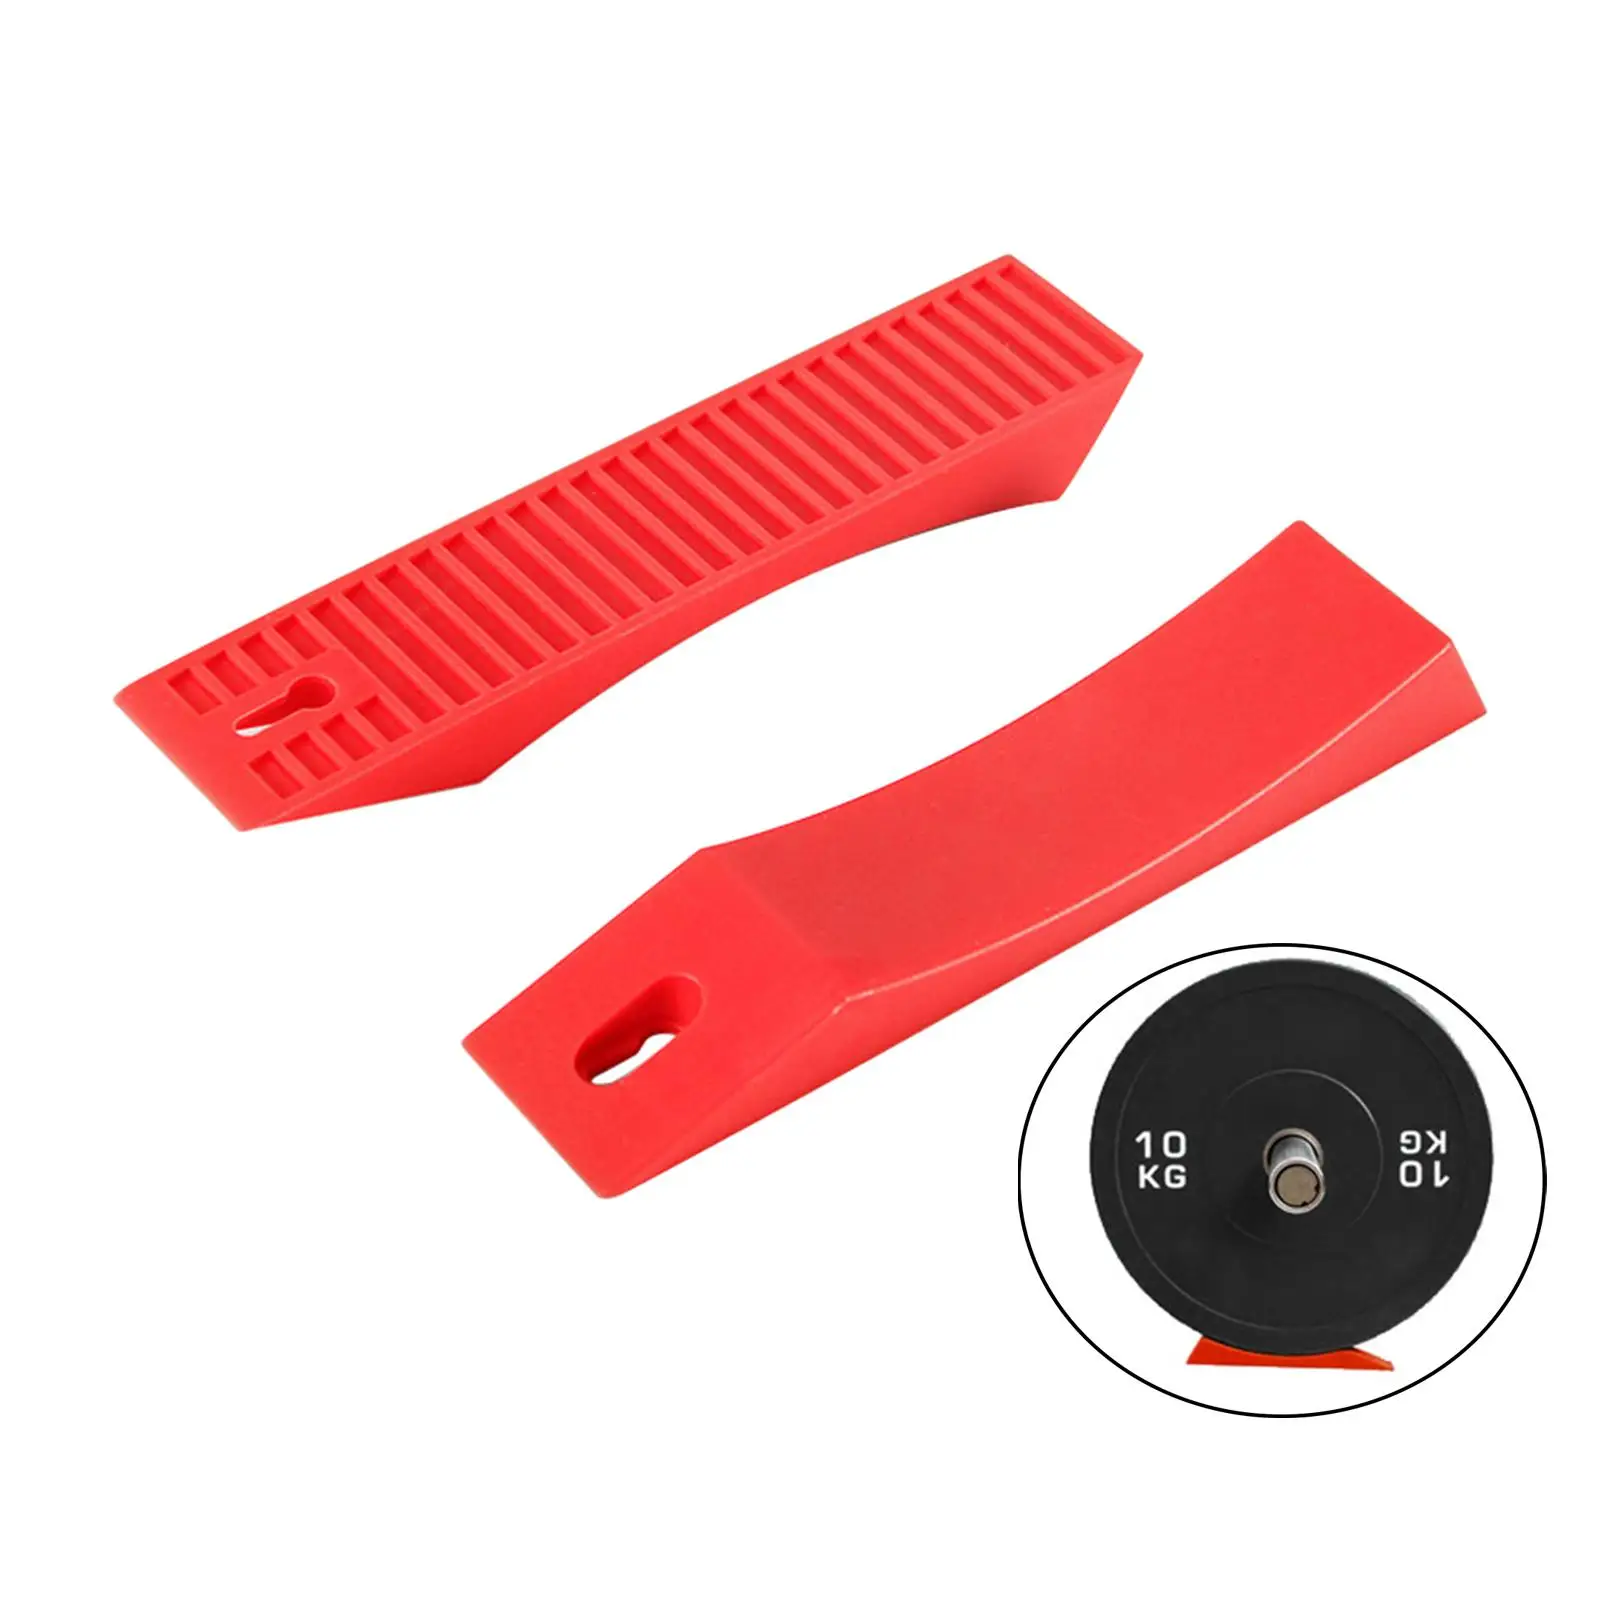 Silicone Portable Home Gym Barbell Plates Multifunction Fitness Effortless Loading Easy Install Deadlift Wedge Universal